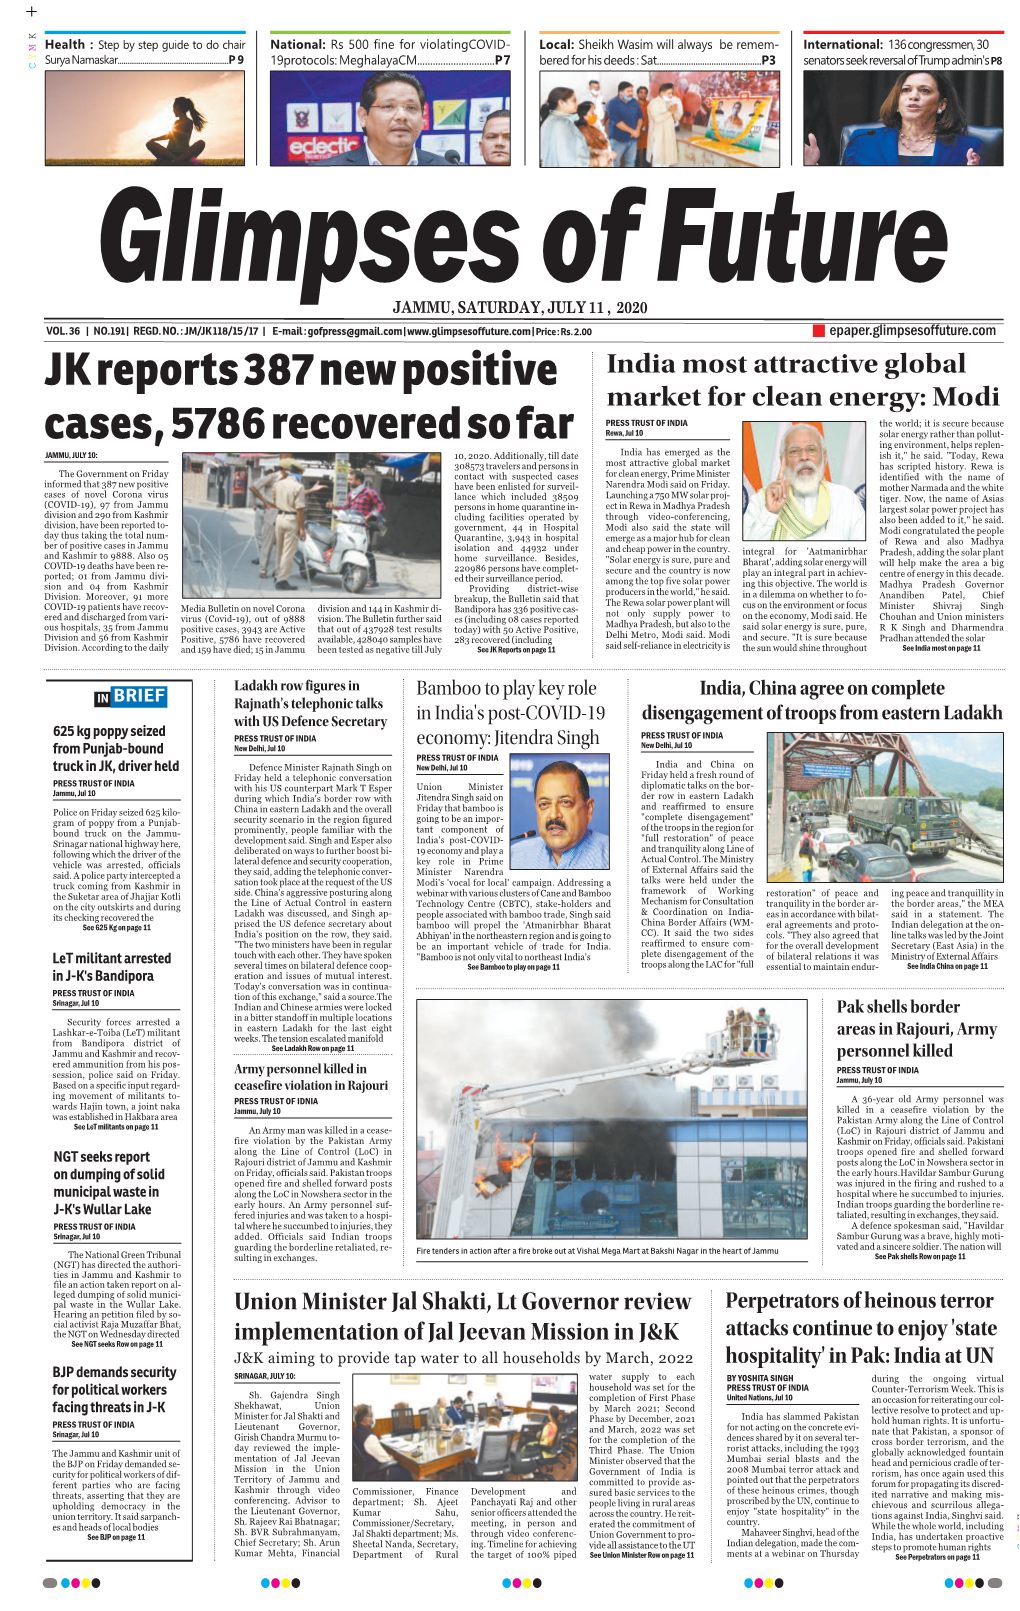 JK Reports 387 New Positive Cases, 5786 Recovered So